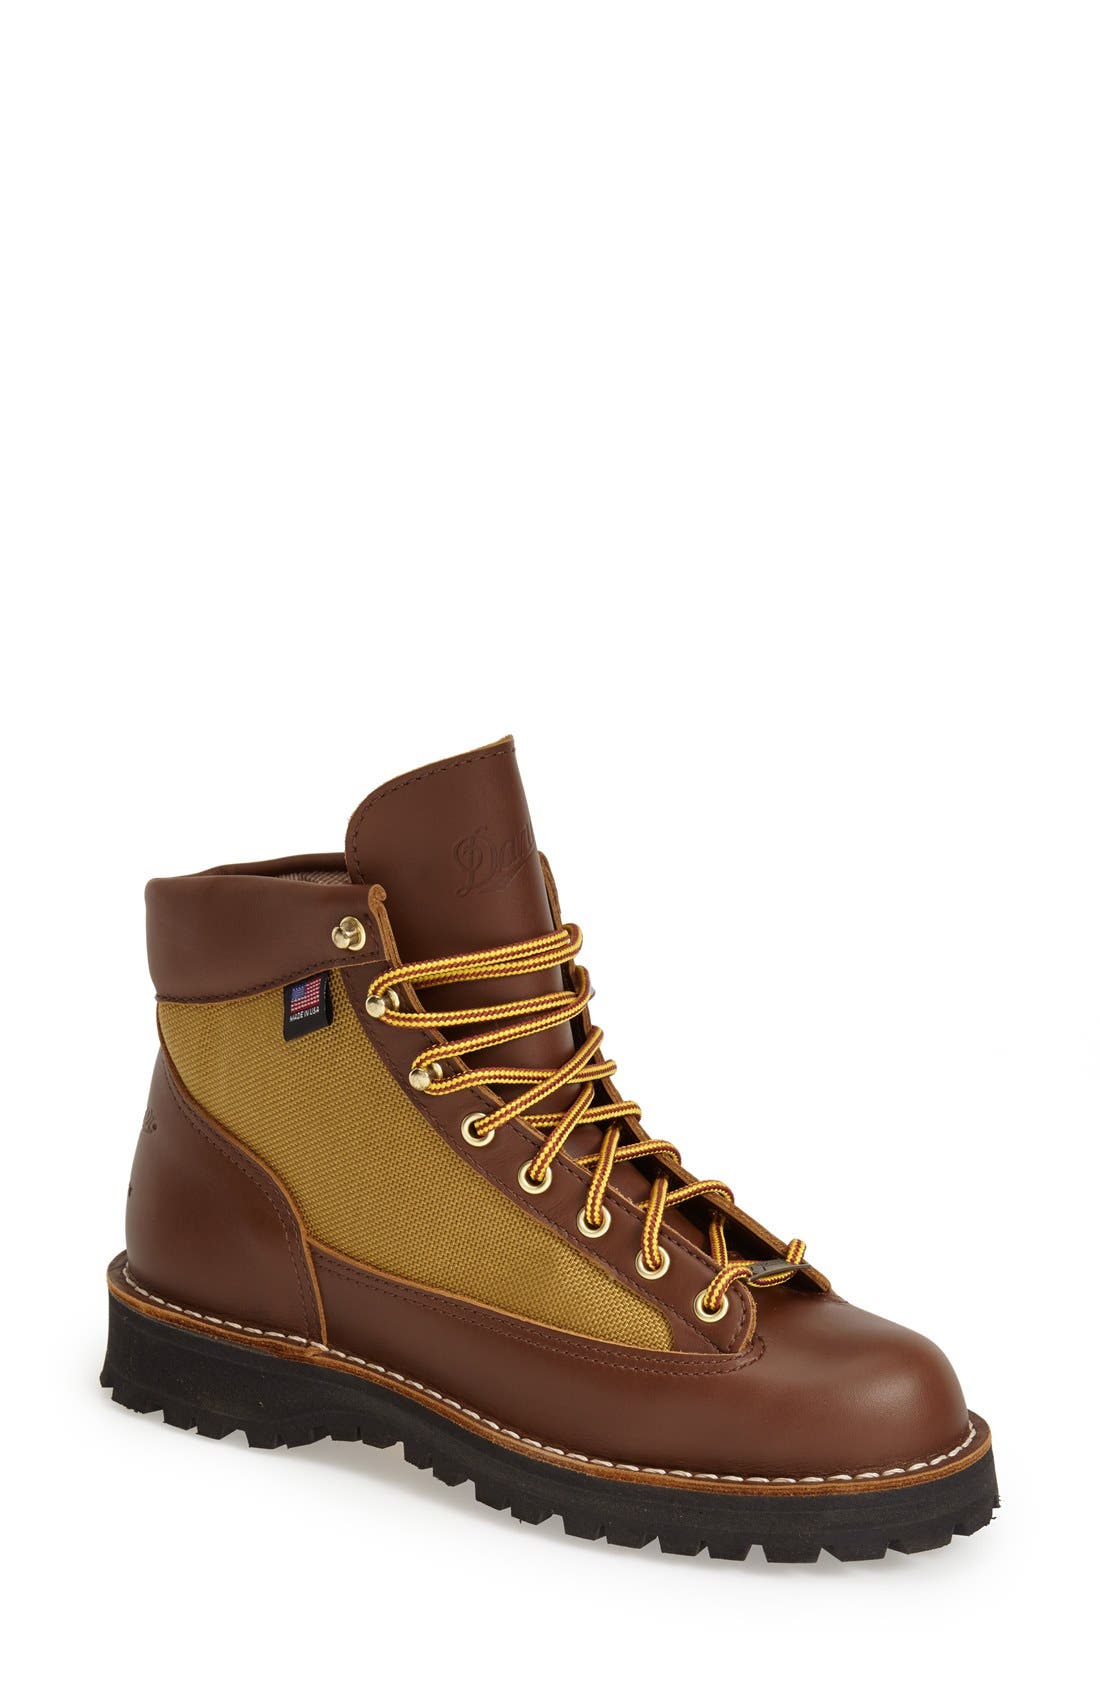 danner boots clearance